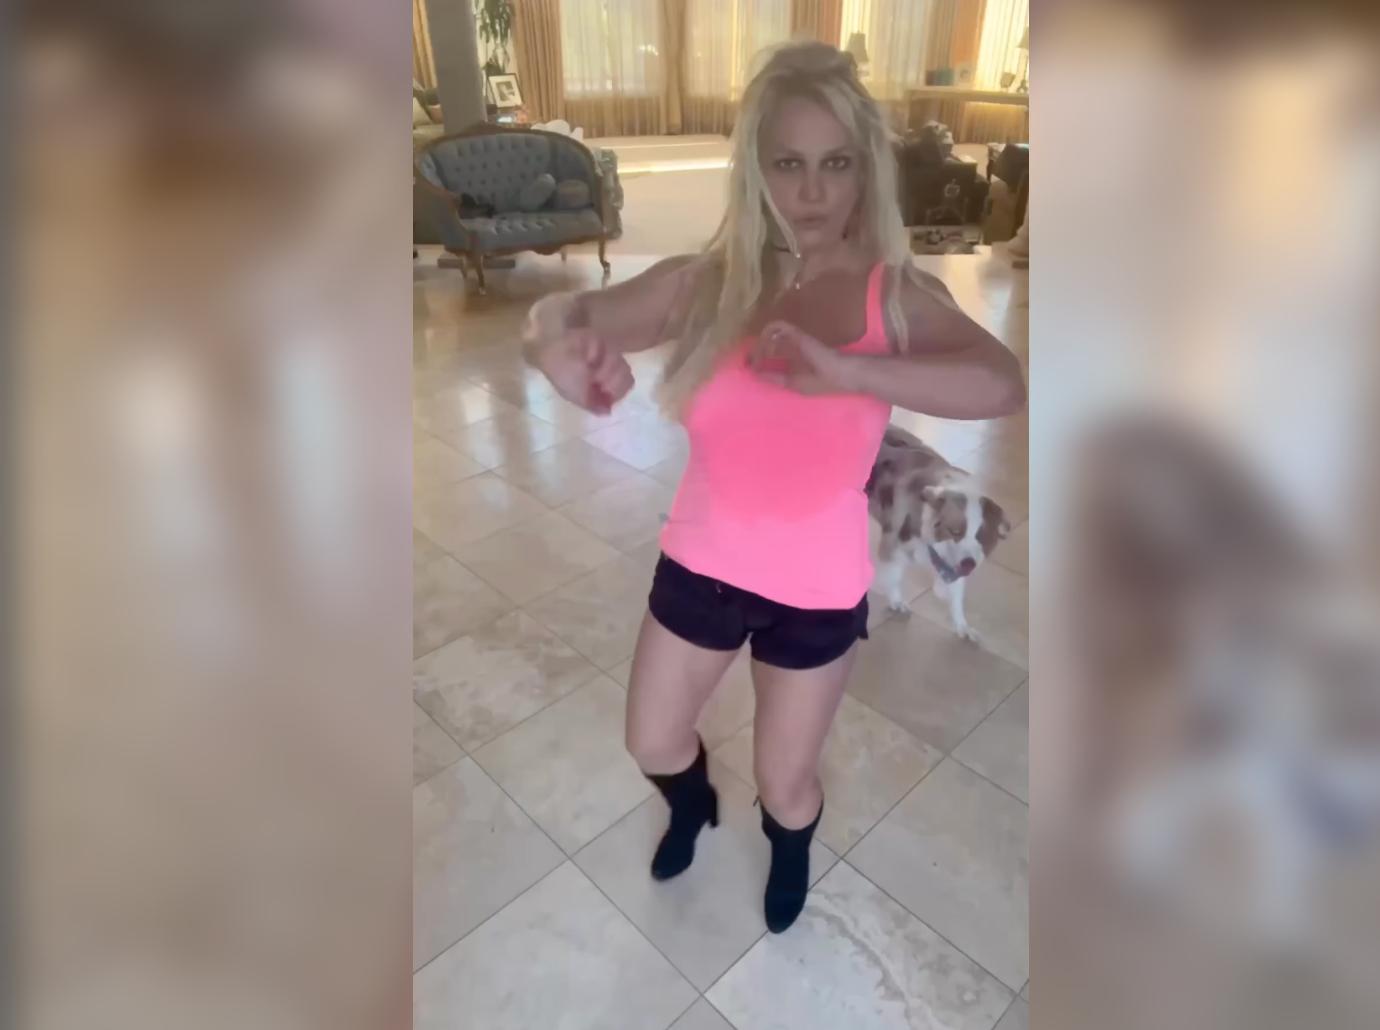 BRITNEY SPEARS - JUMPING WITH A BIKINI TOP AND JEAN SHORTS !!